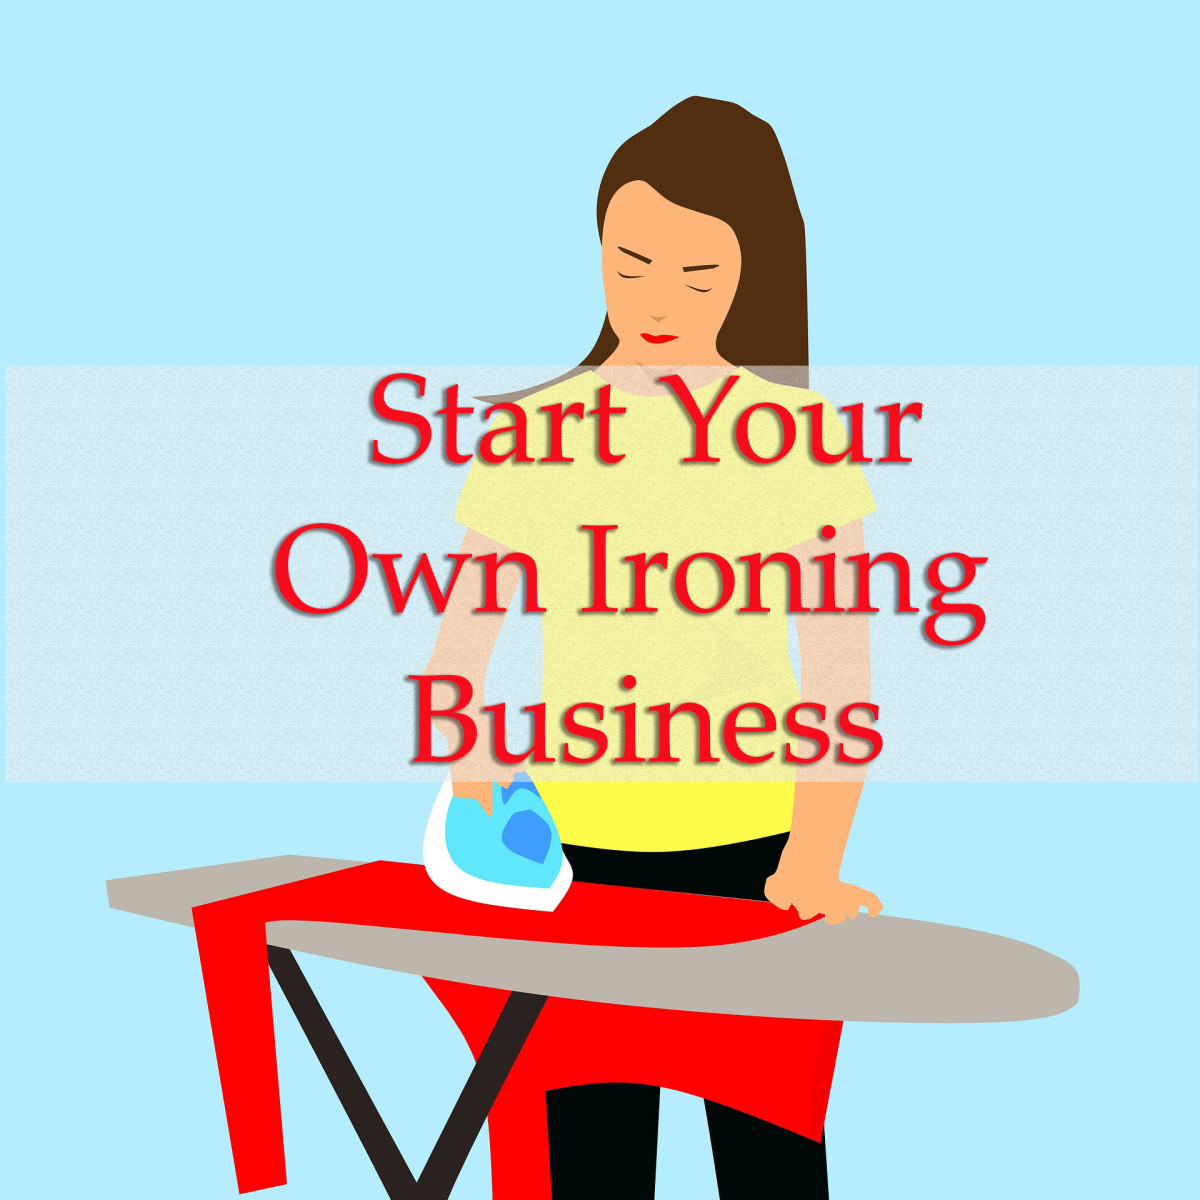 Start your own ironing business